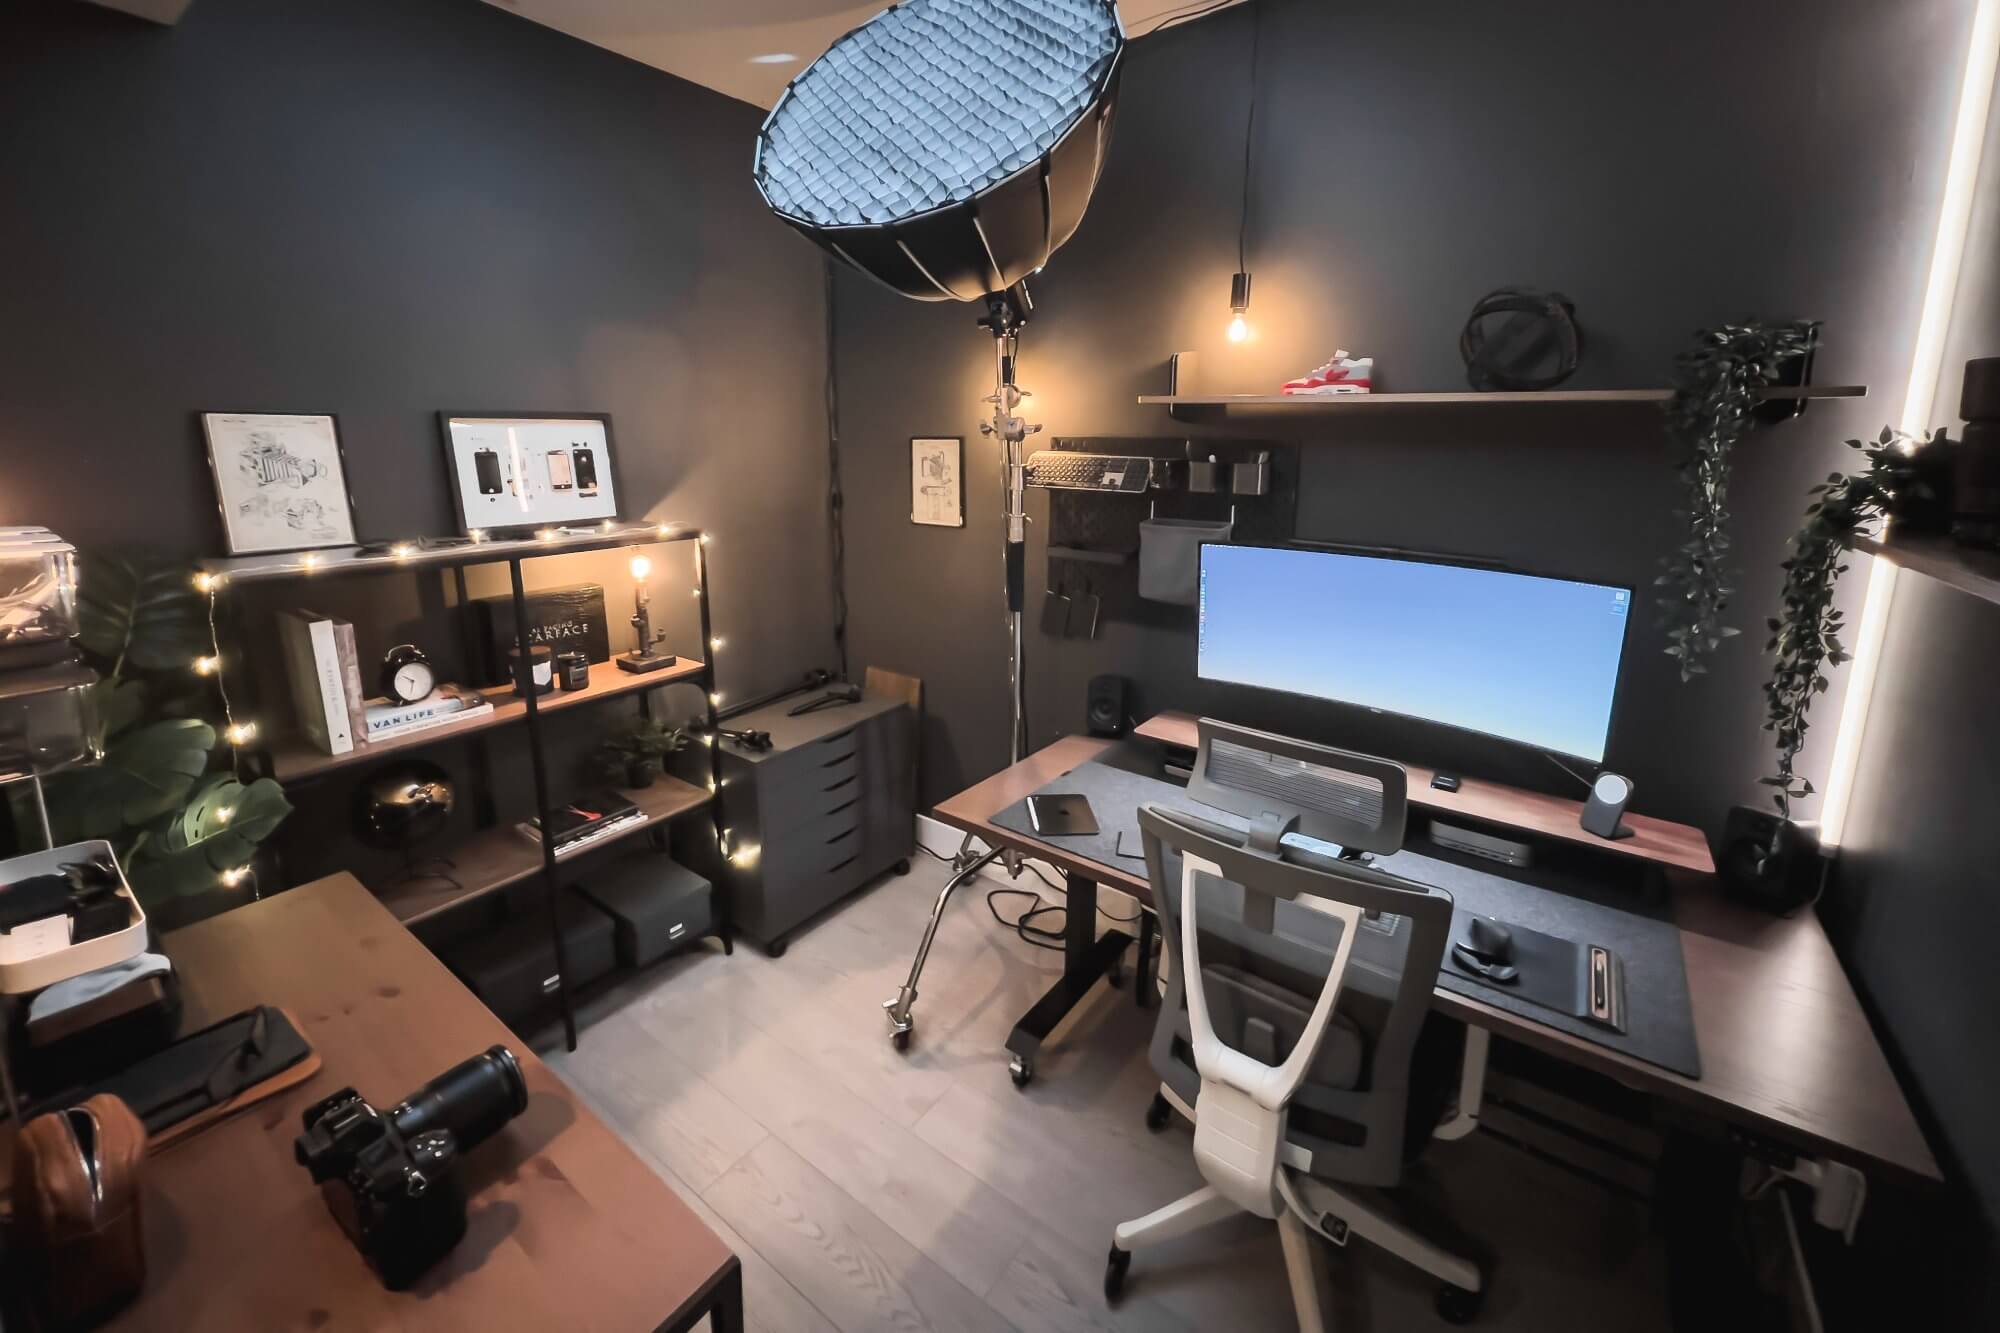 A photographer’s windowless workspace